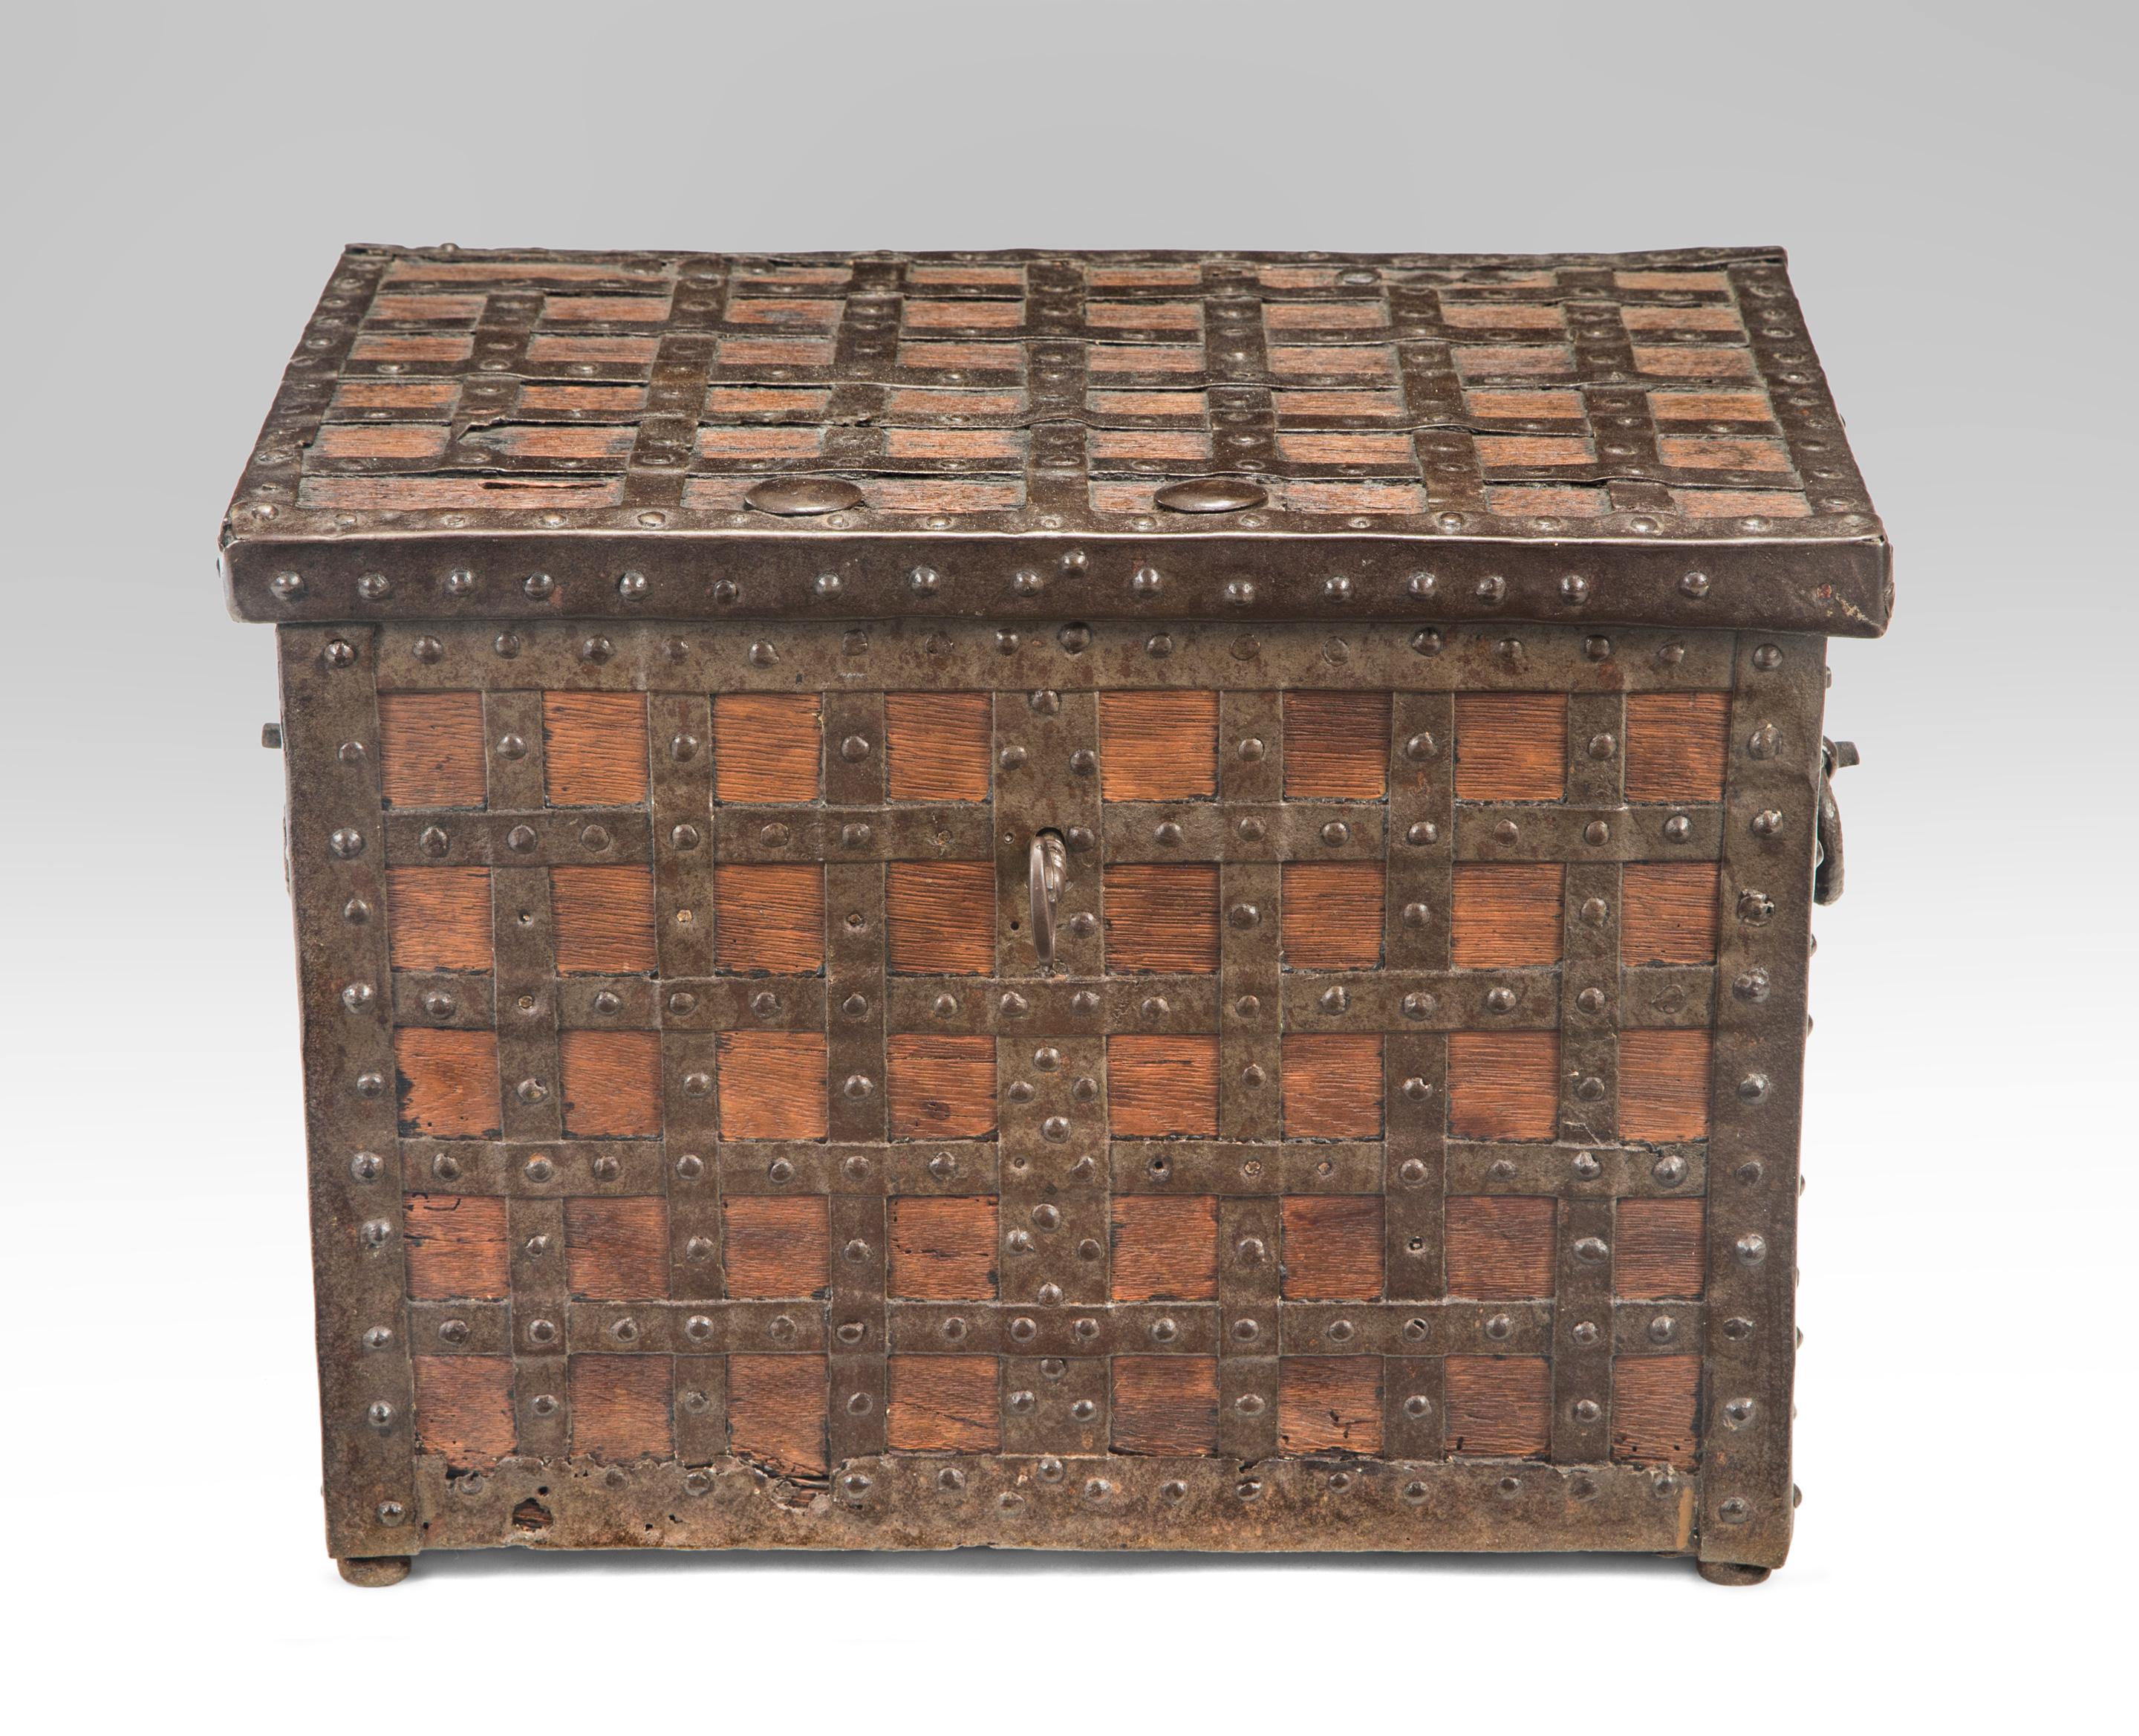 A continental Baroque trunk or strong box
circa 1700
A powerful box composed of wood overlaid with a grid of iron which not only strengthens the box but imparts a complex and serene style. The rectangular box mounted throughout with studded metal